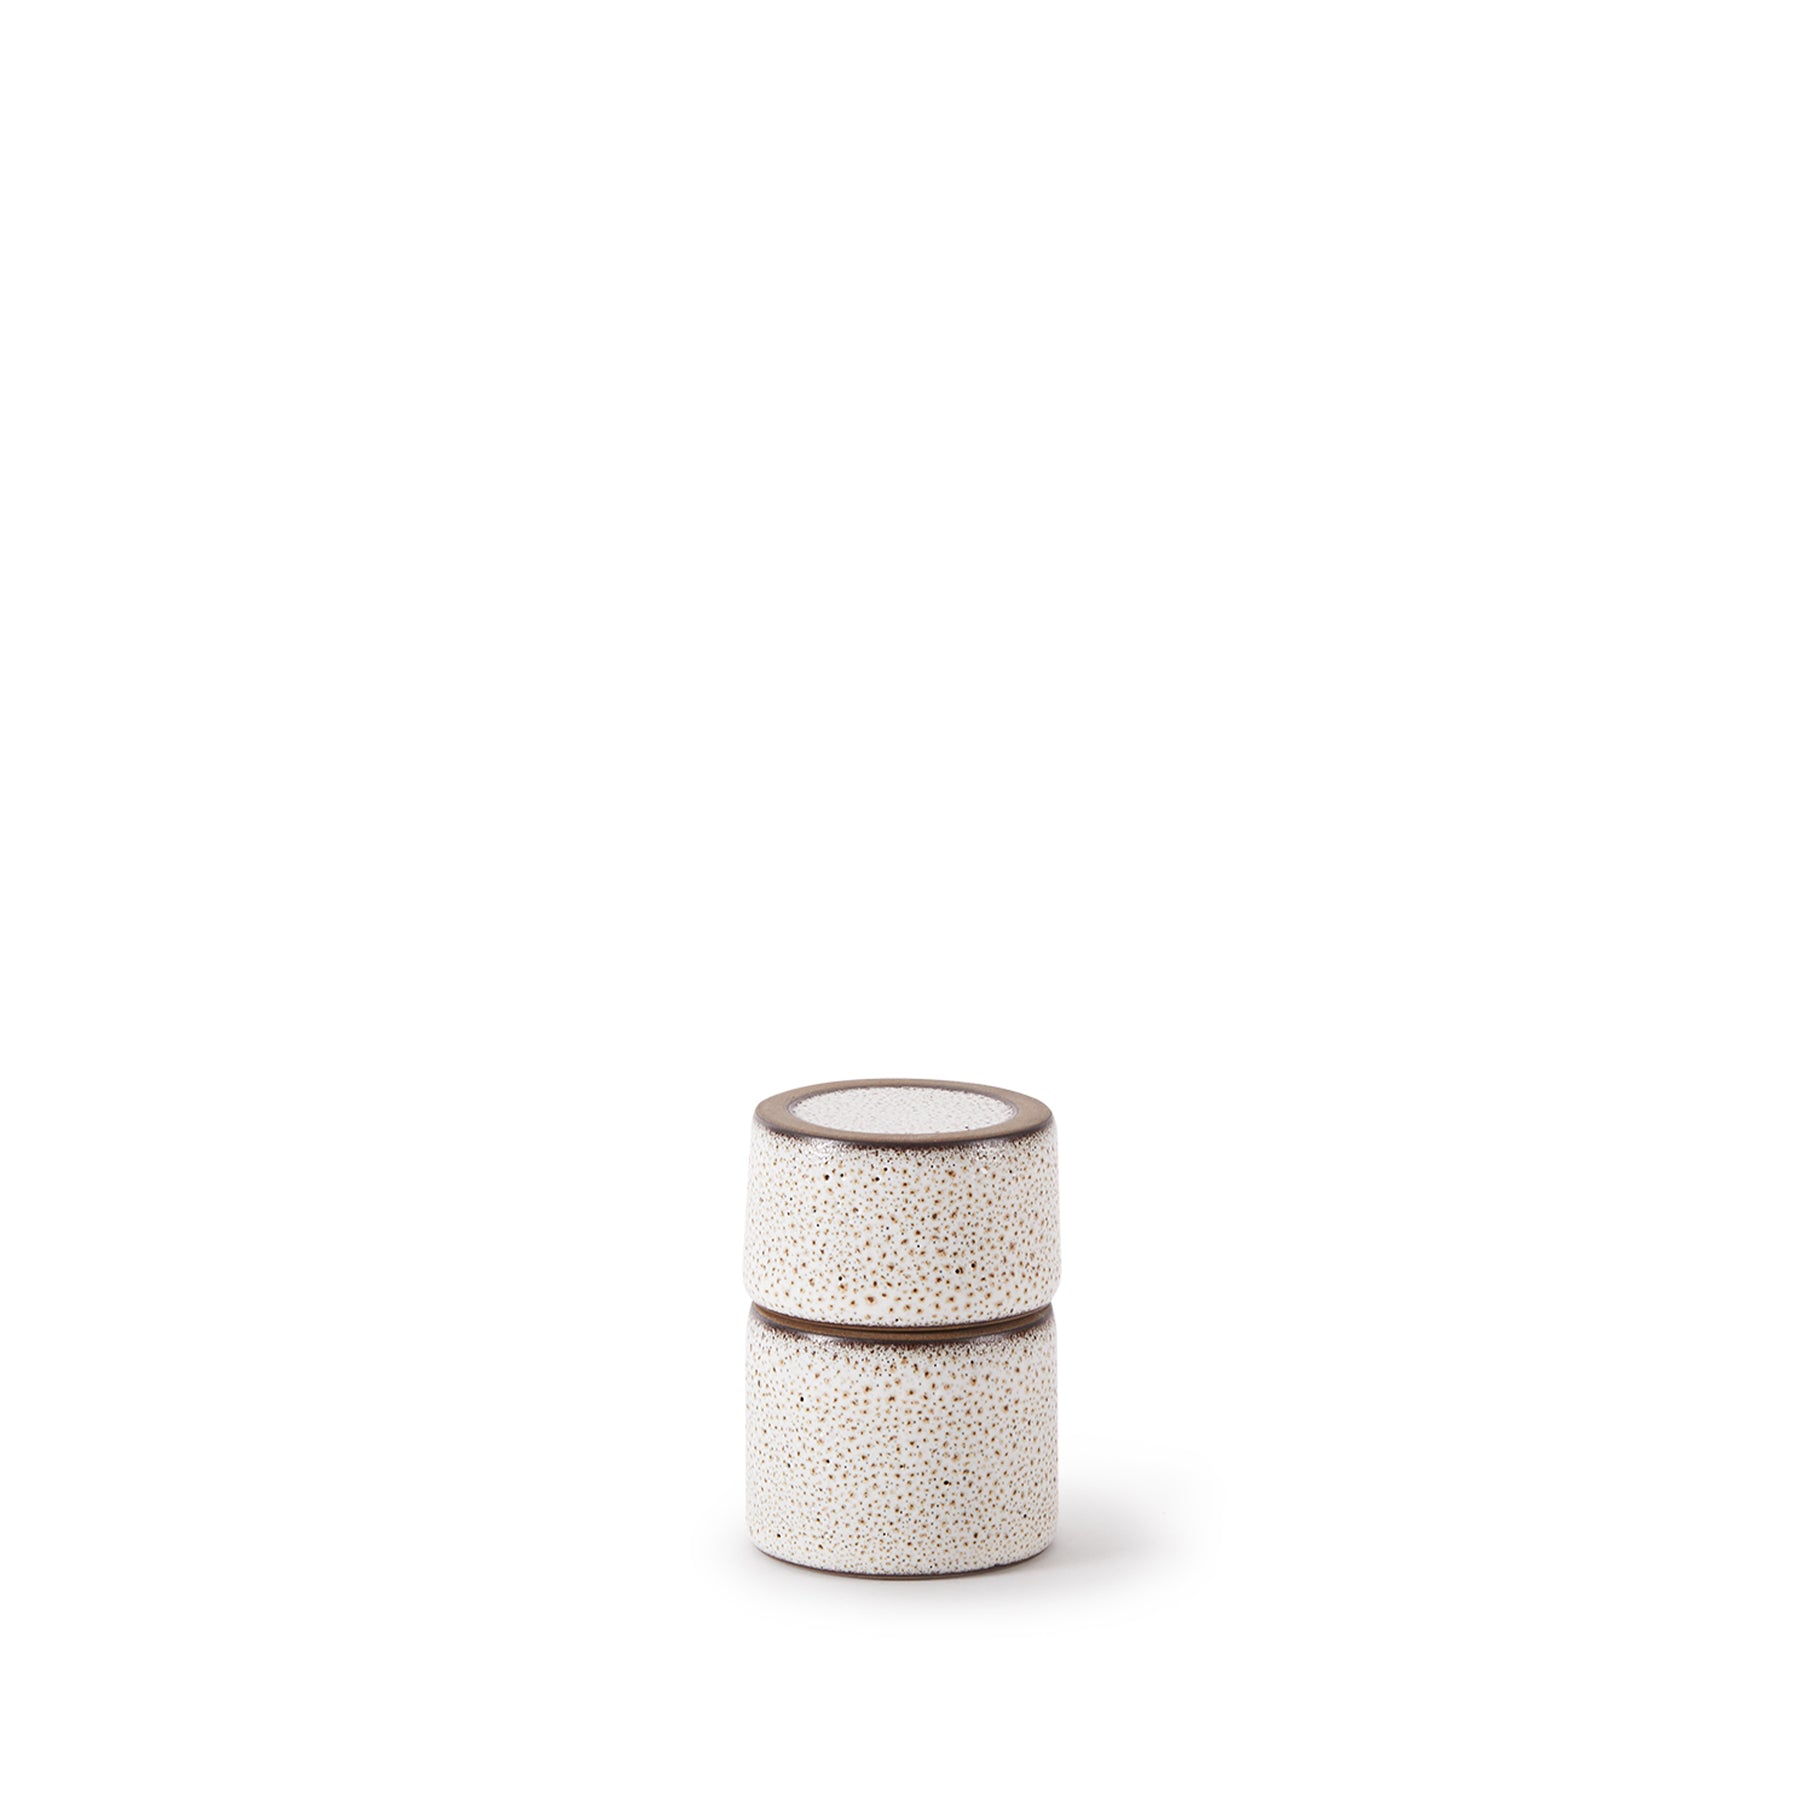 Matchstick Holder in Opaque White and Matte Brown Zoom Image 1